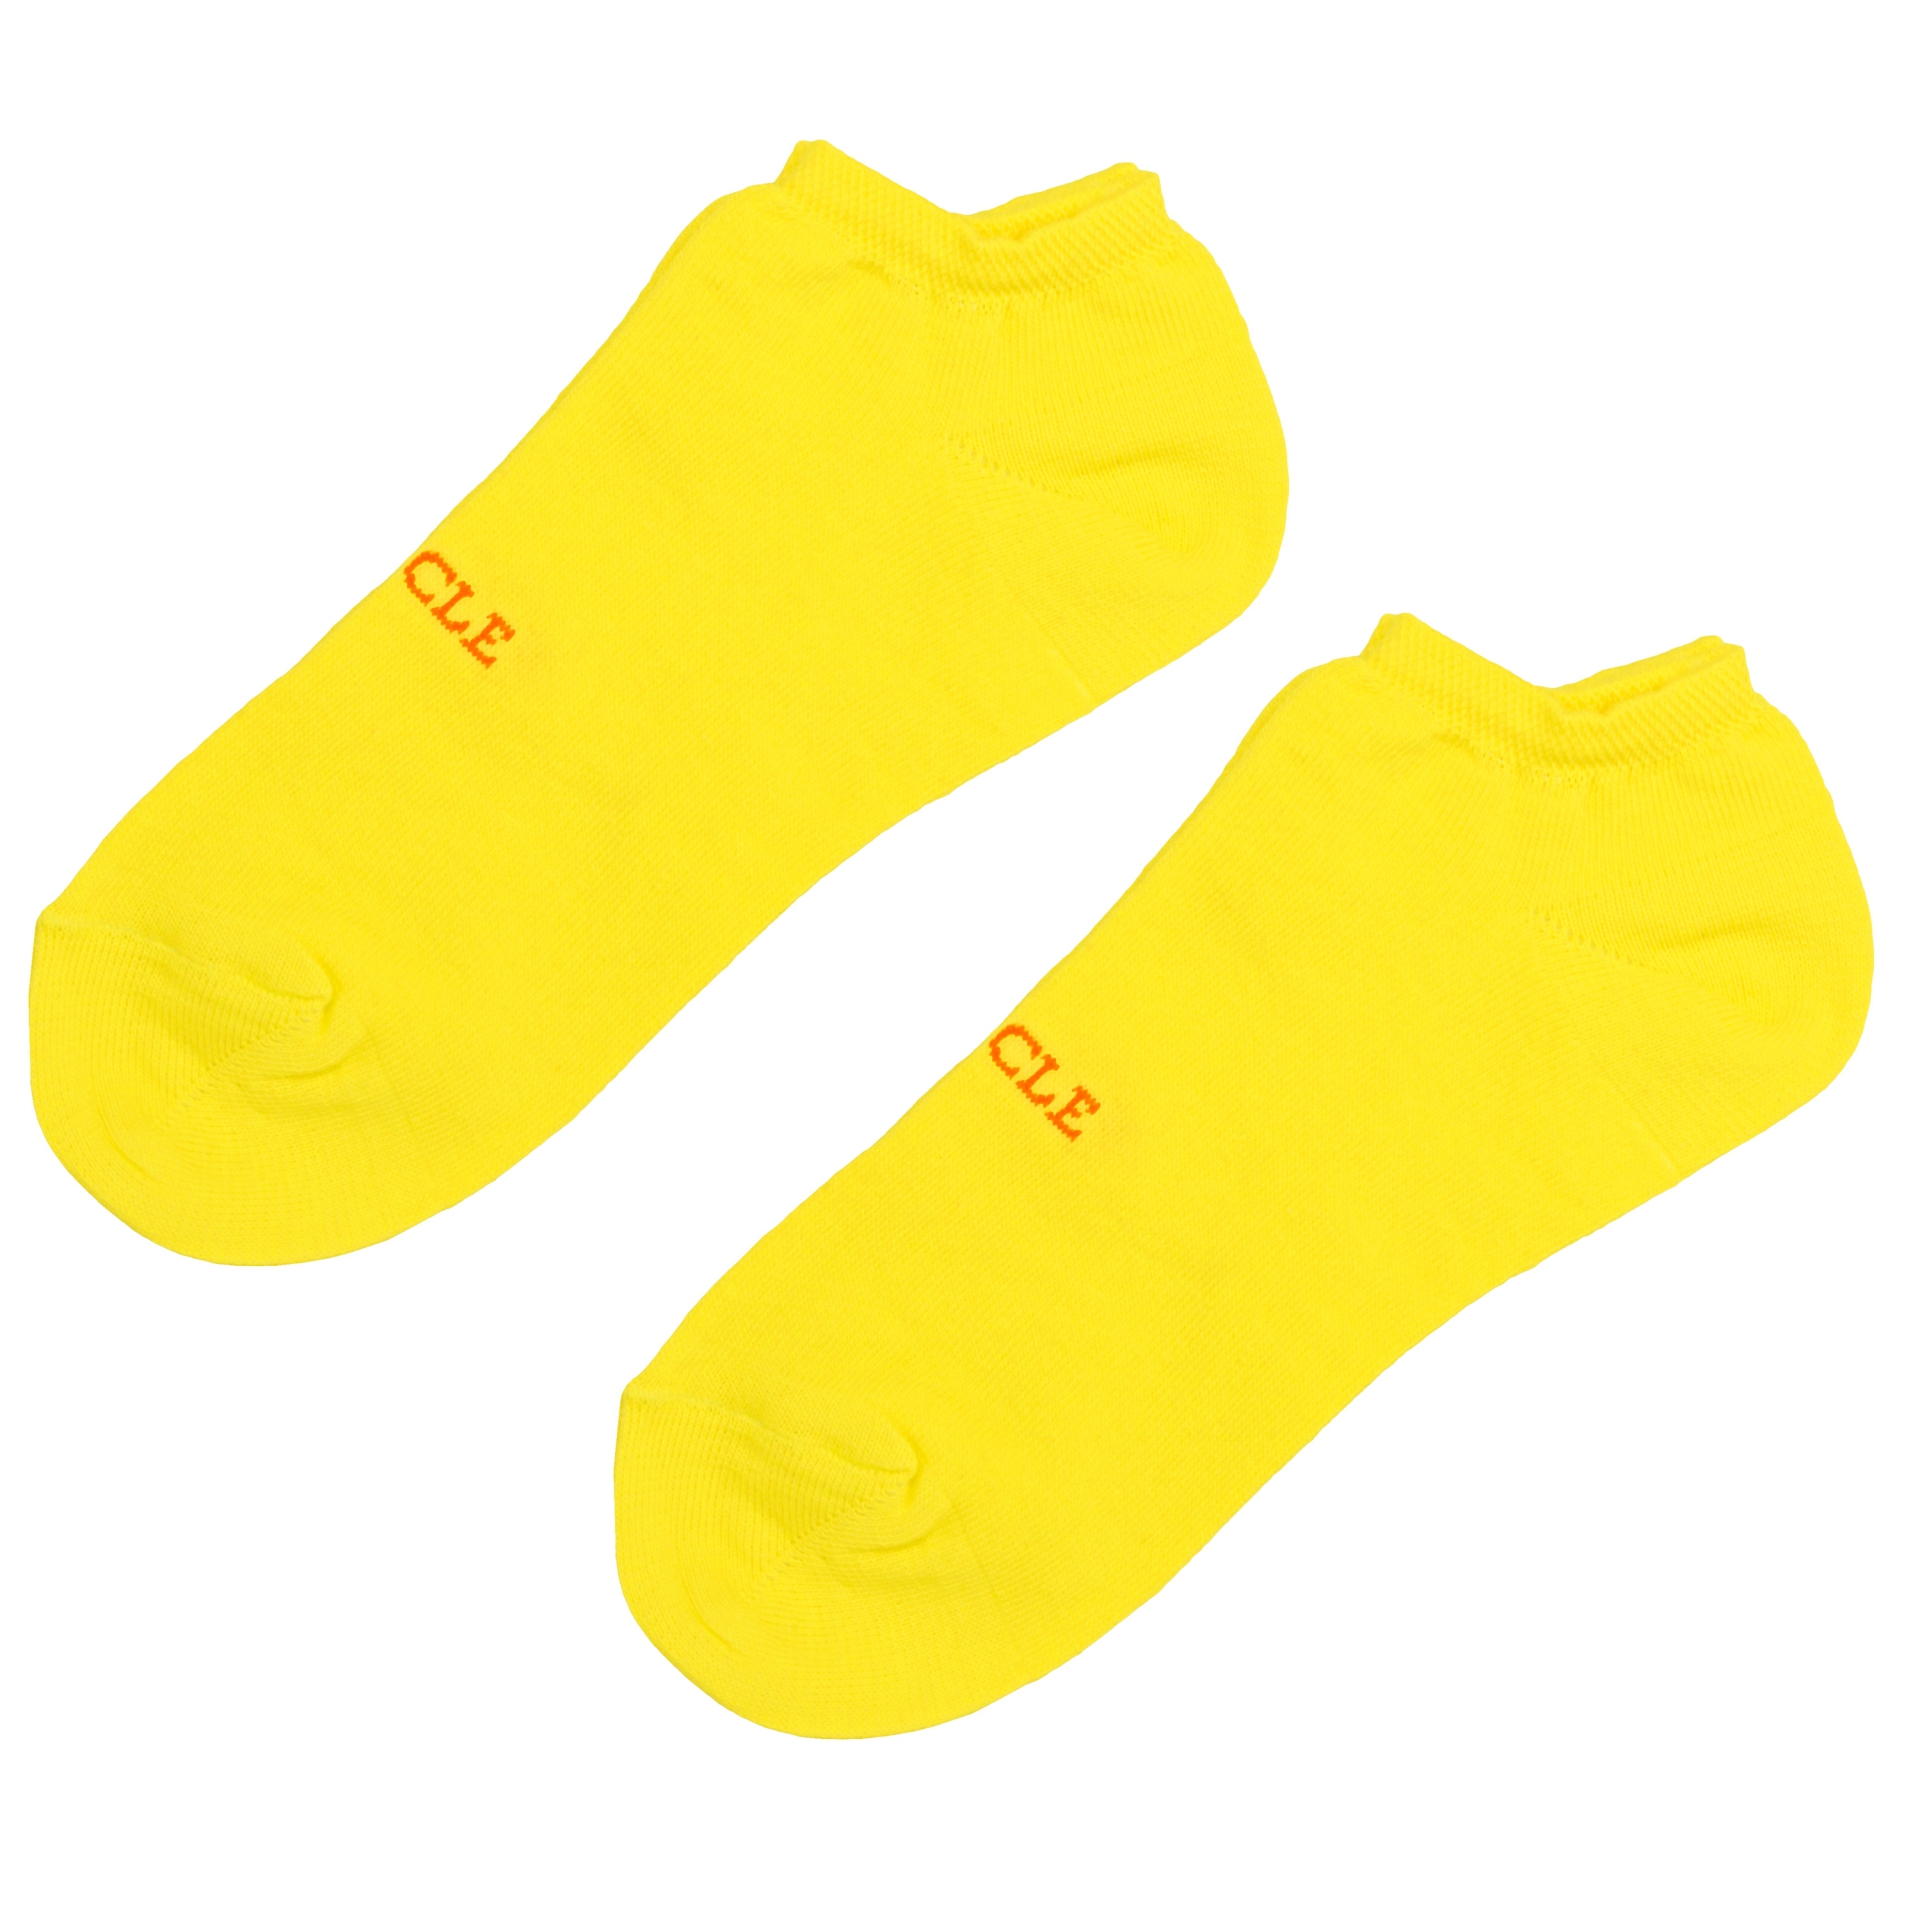 Ankle socks yellow fluo for men - BRUCLE